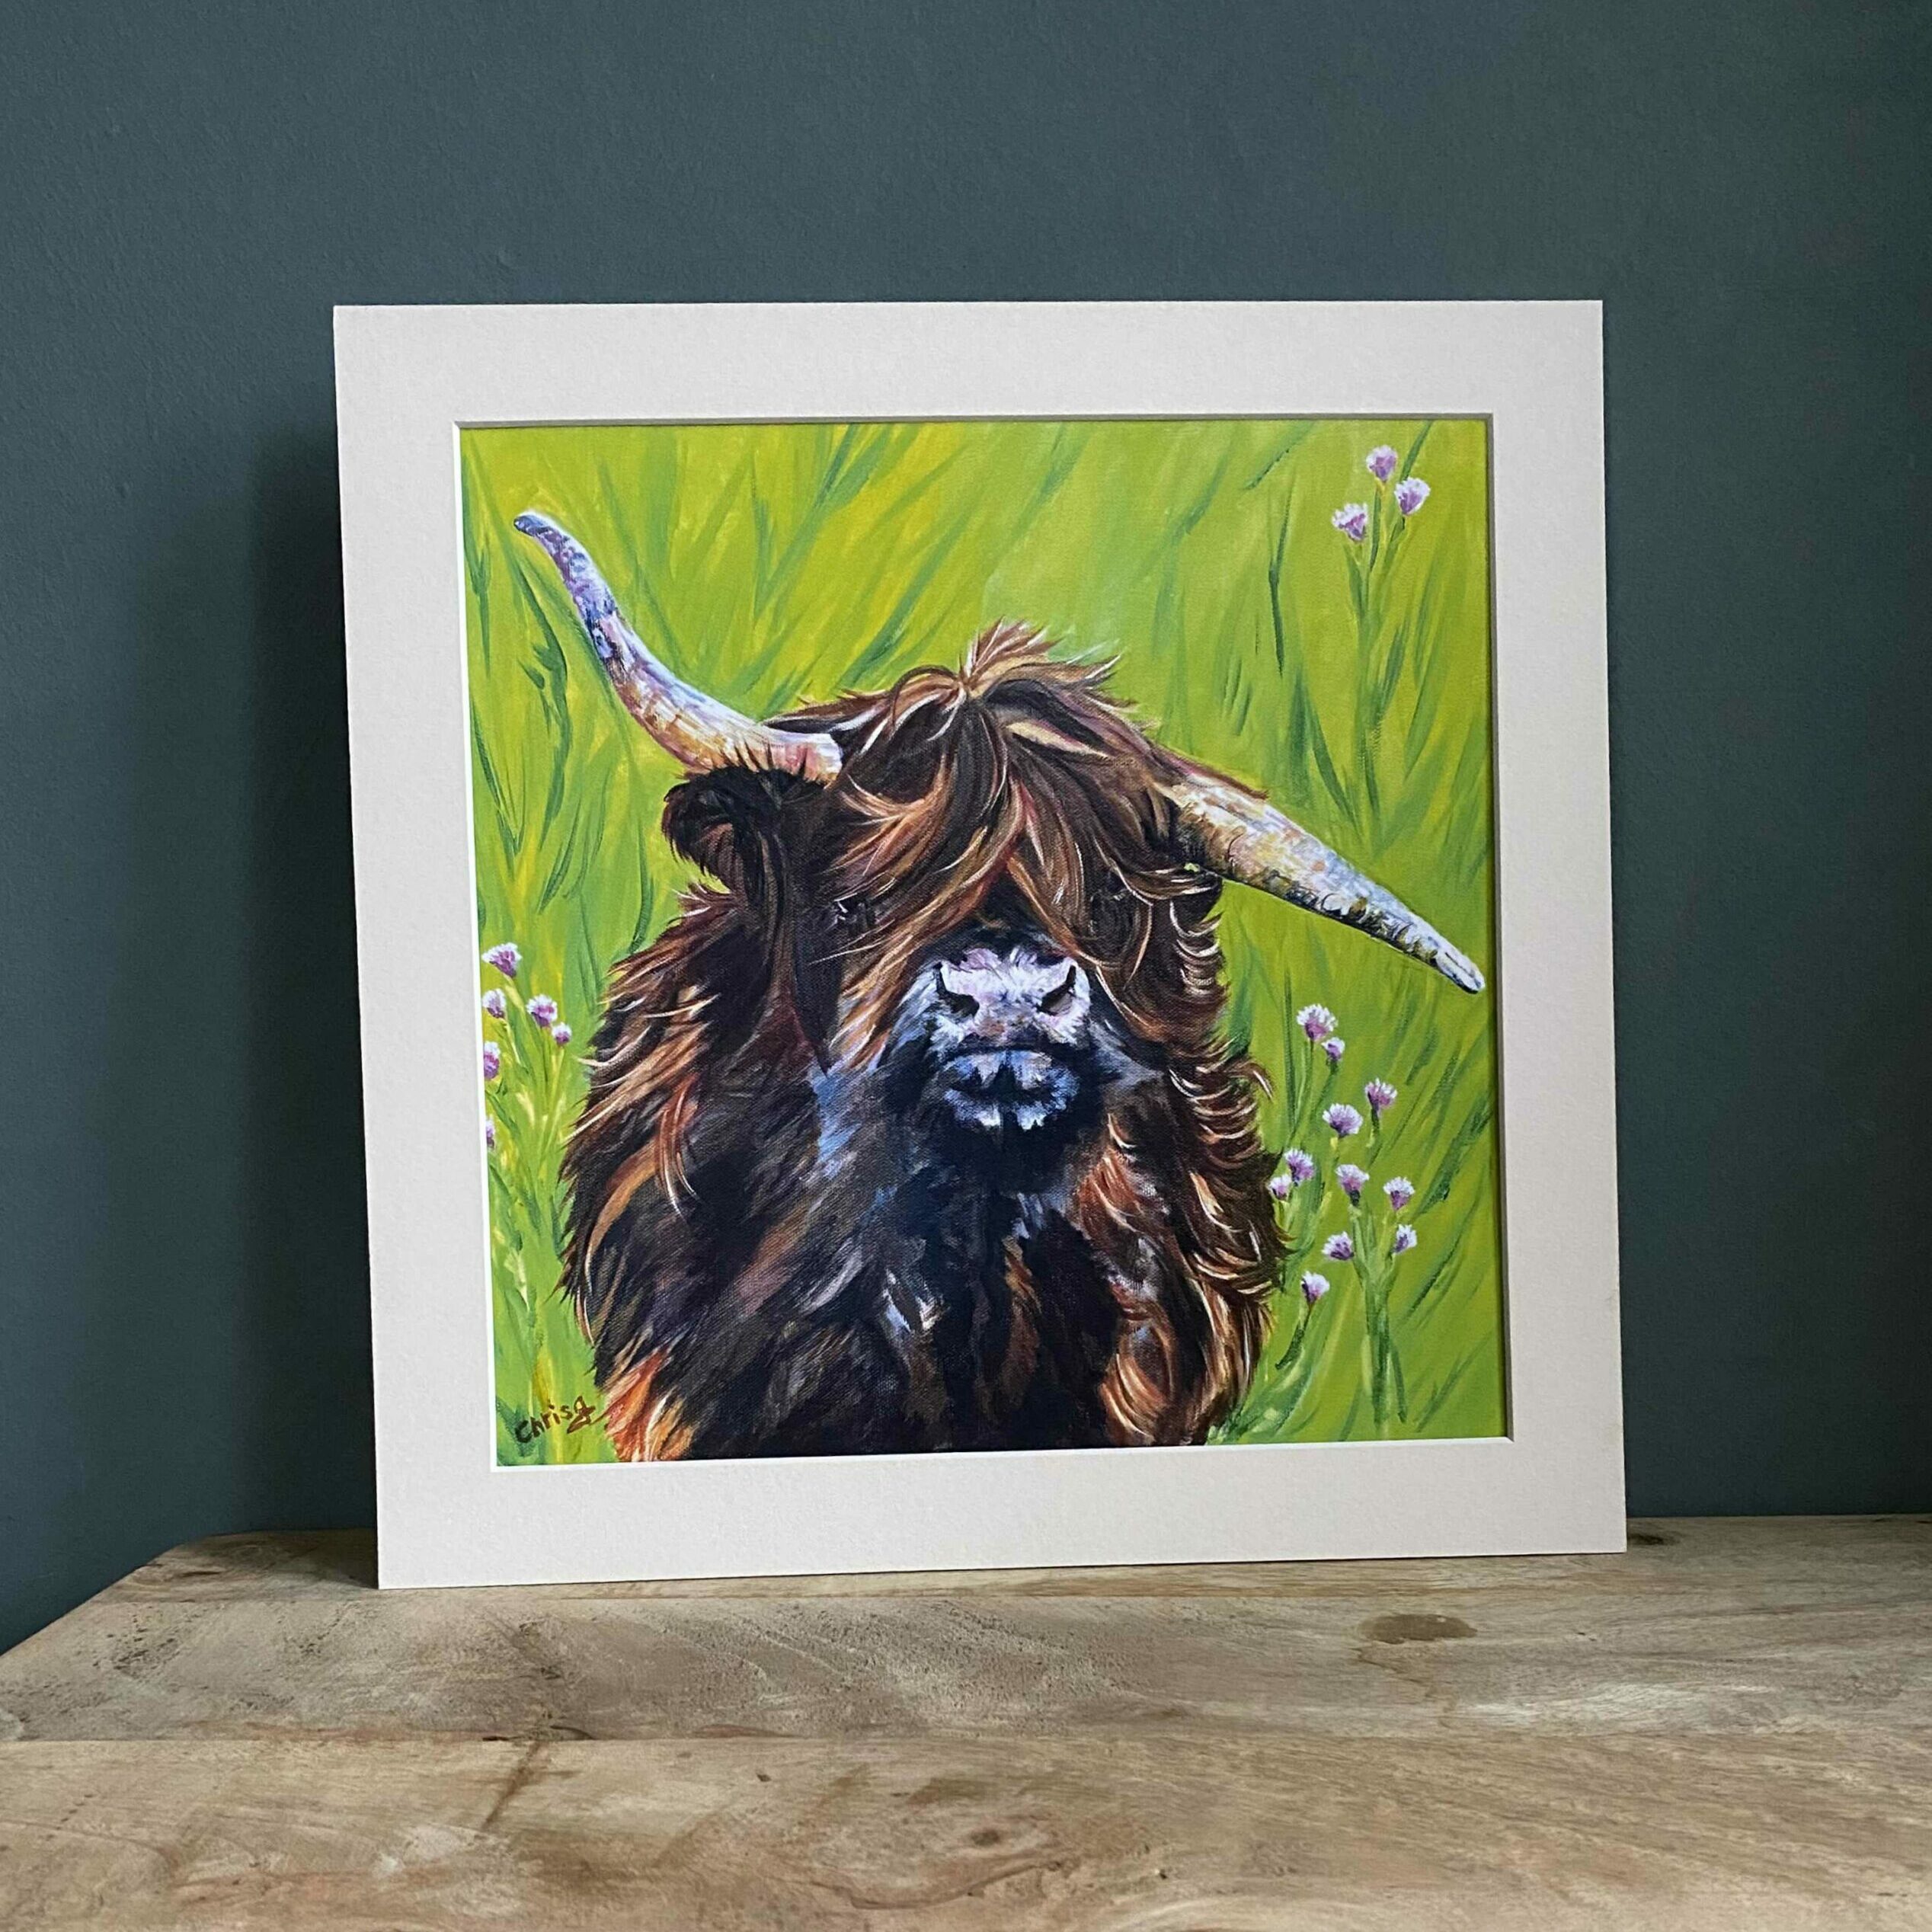 Mounted print of the highland cow called “wildchild”